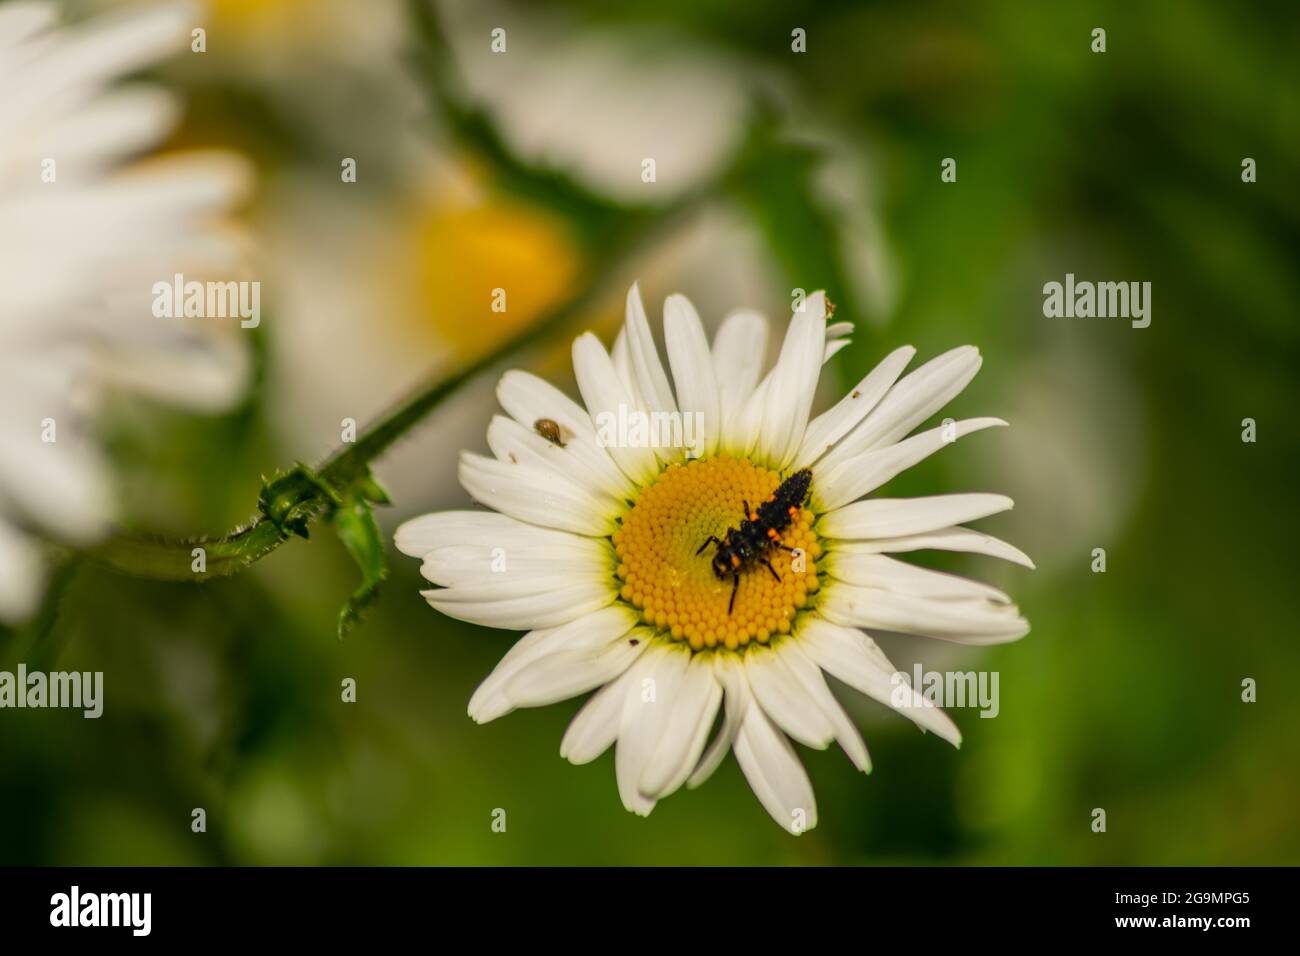 Ladybug larvae sitting in the centre of white and yellow flower, larva bug on chamomile blookming flower in the garden with blurry natural background Stock Photo